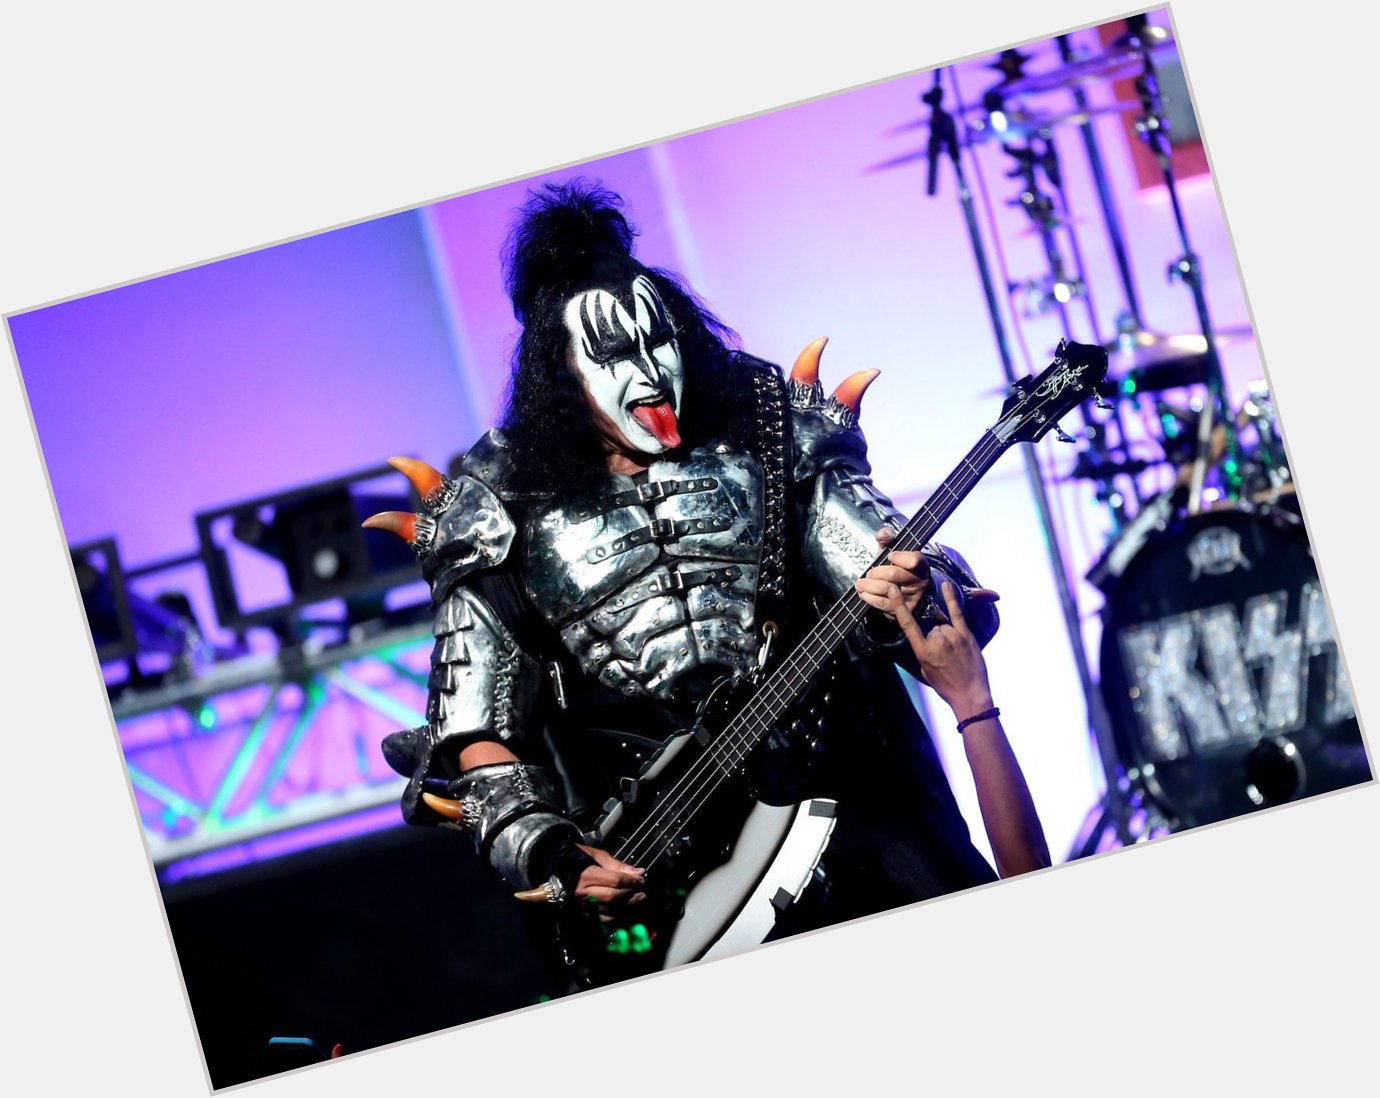 Happy Birthday to Gene Simmons who turns 68 today! 